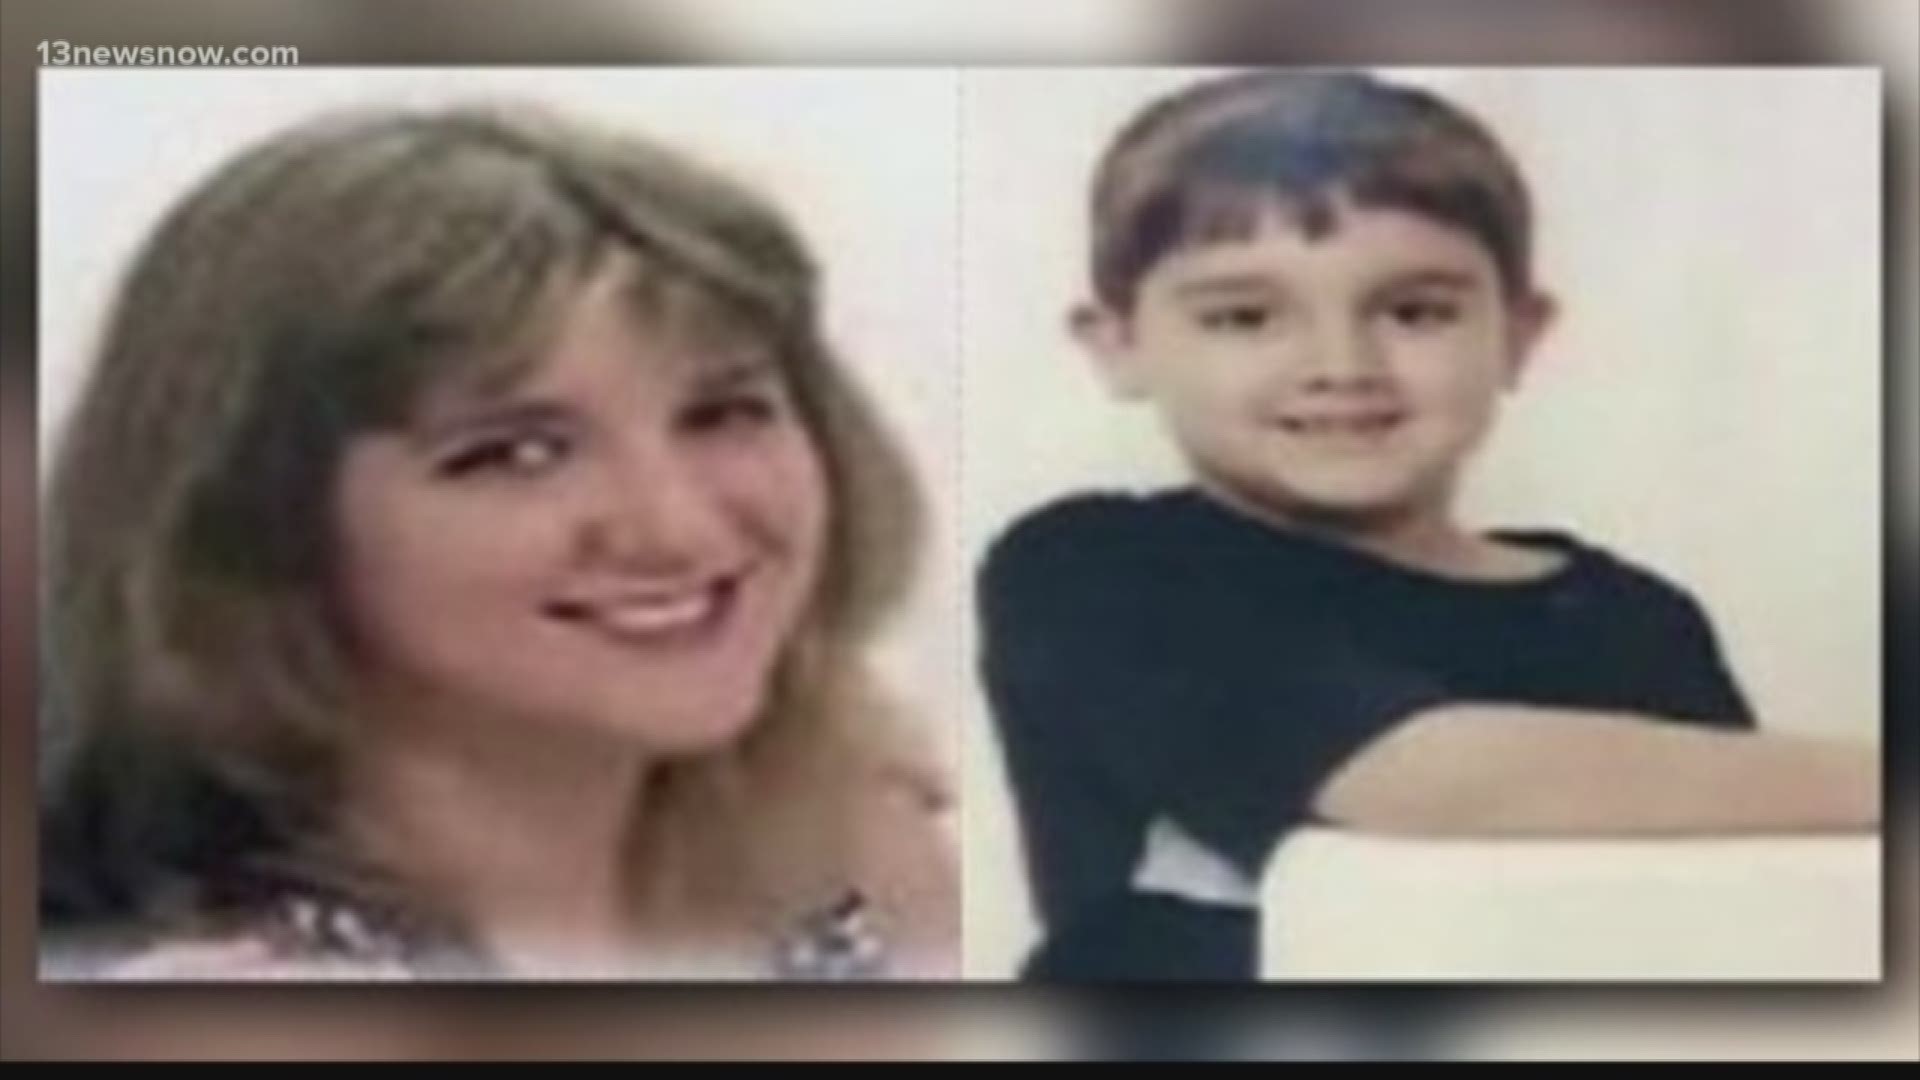 Lois Schmidt and her son, 7-year-old Jonathan Vetrano, died 14 years ago. They were pulled from their burning Virginia Beach home, and police learned the pair had been shot to death.